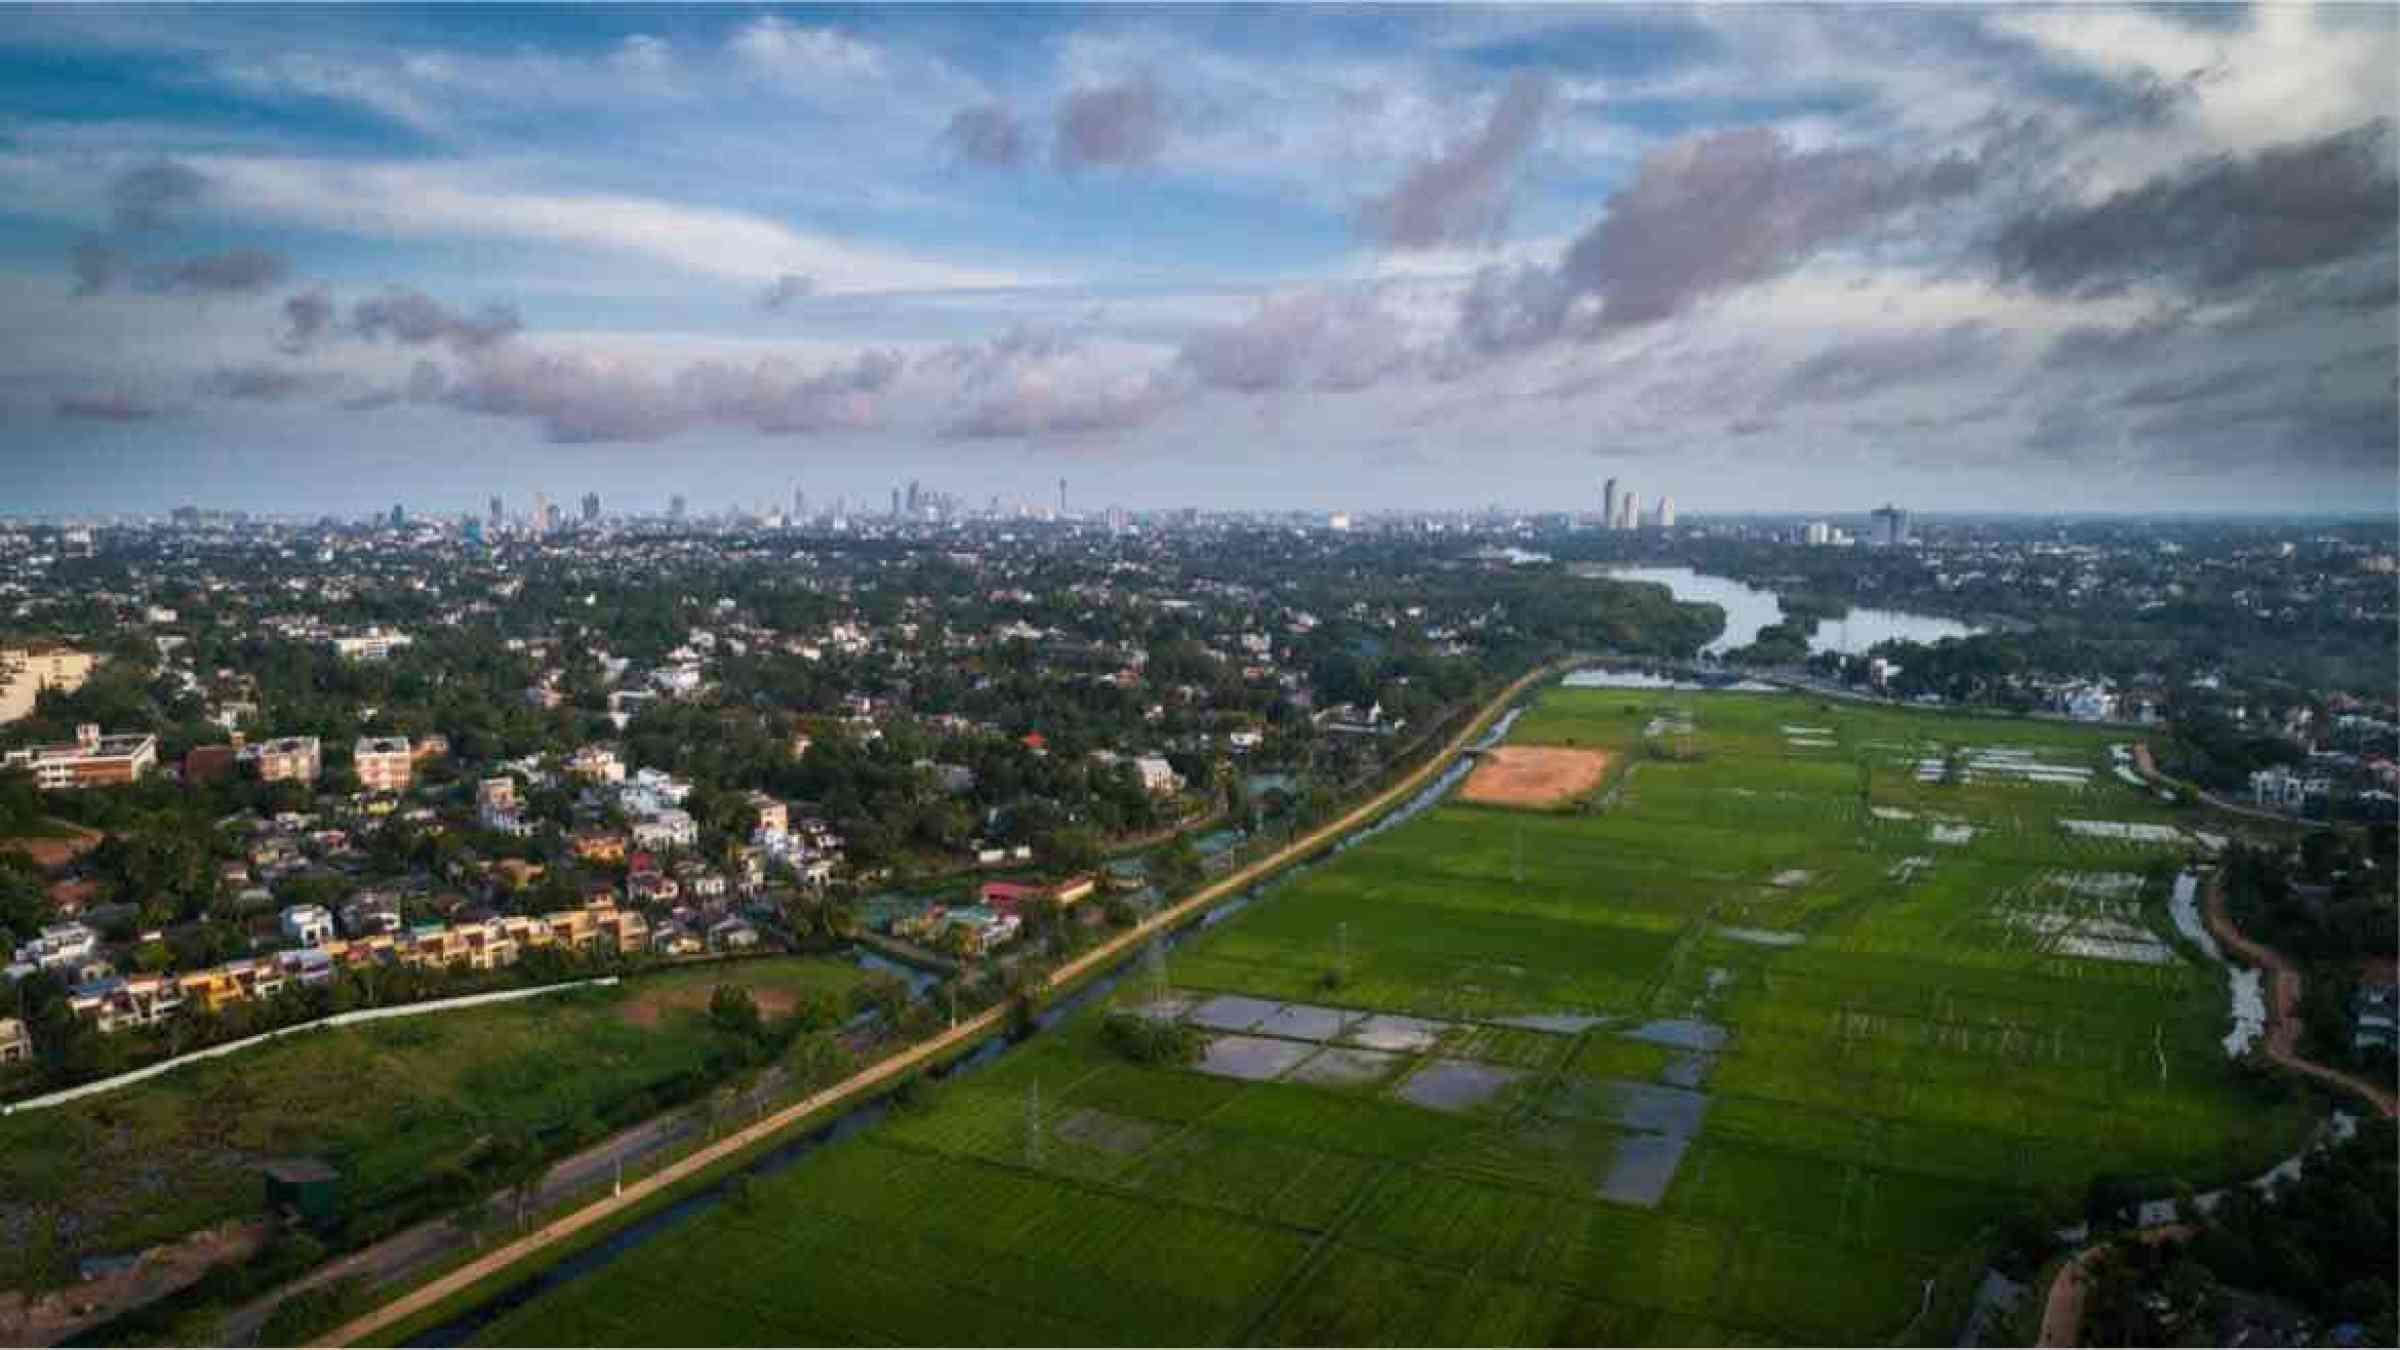 Aerial view of Colombo's wetlands